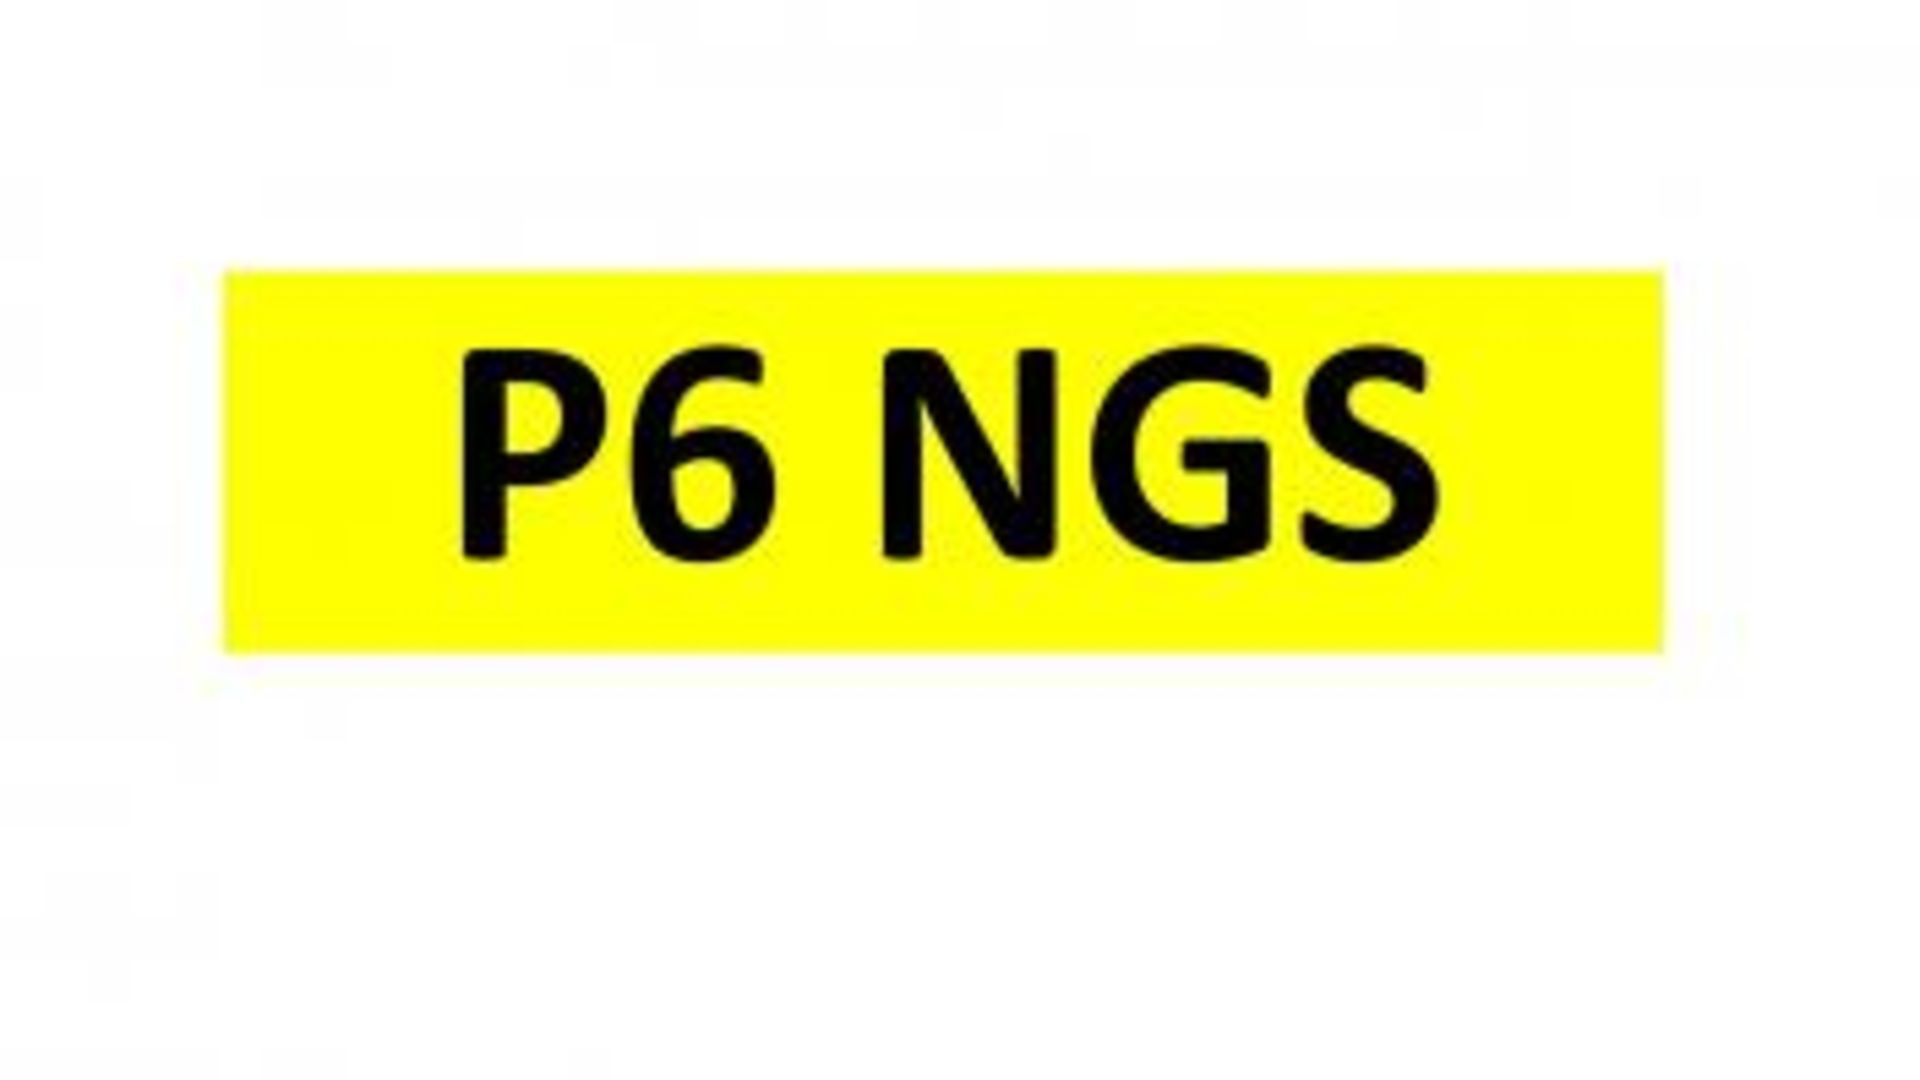 Registration - P6 NGS